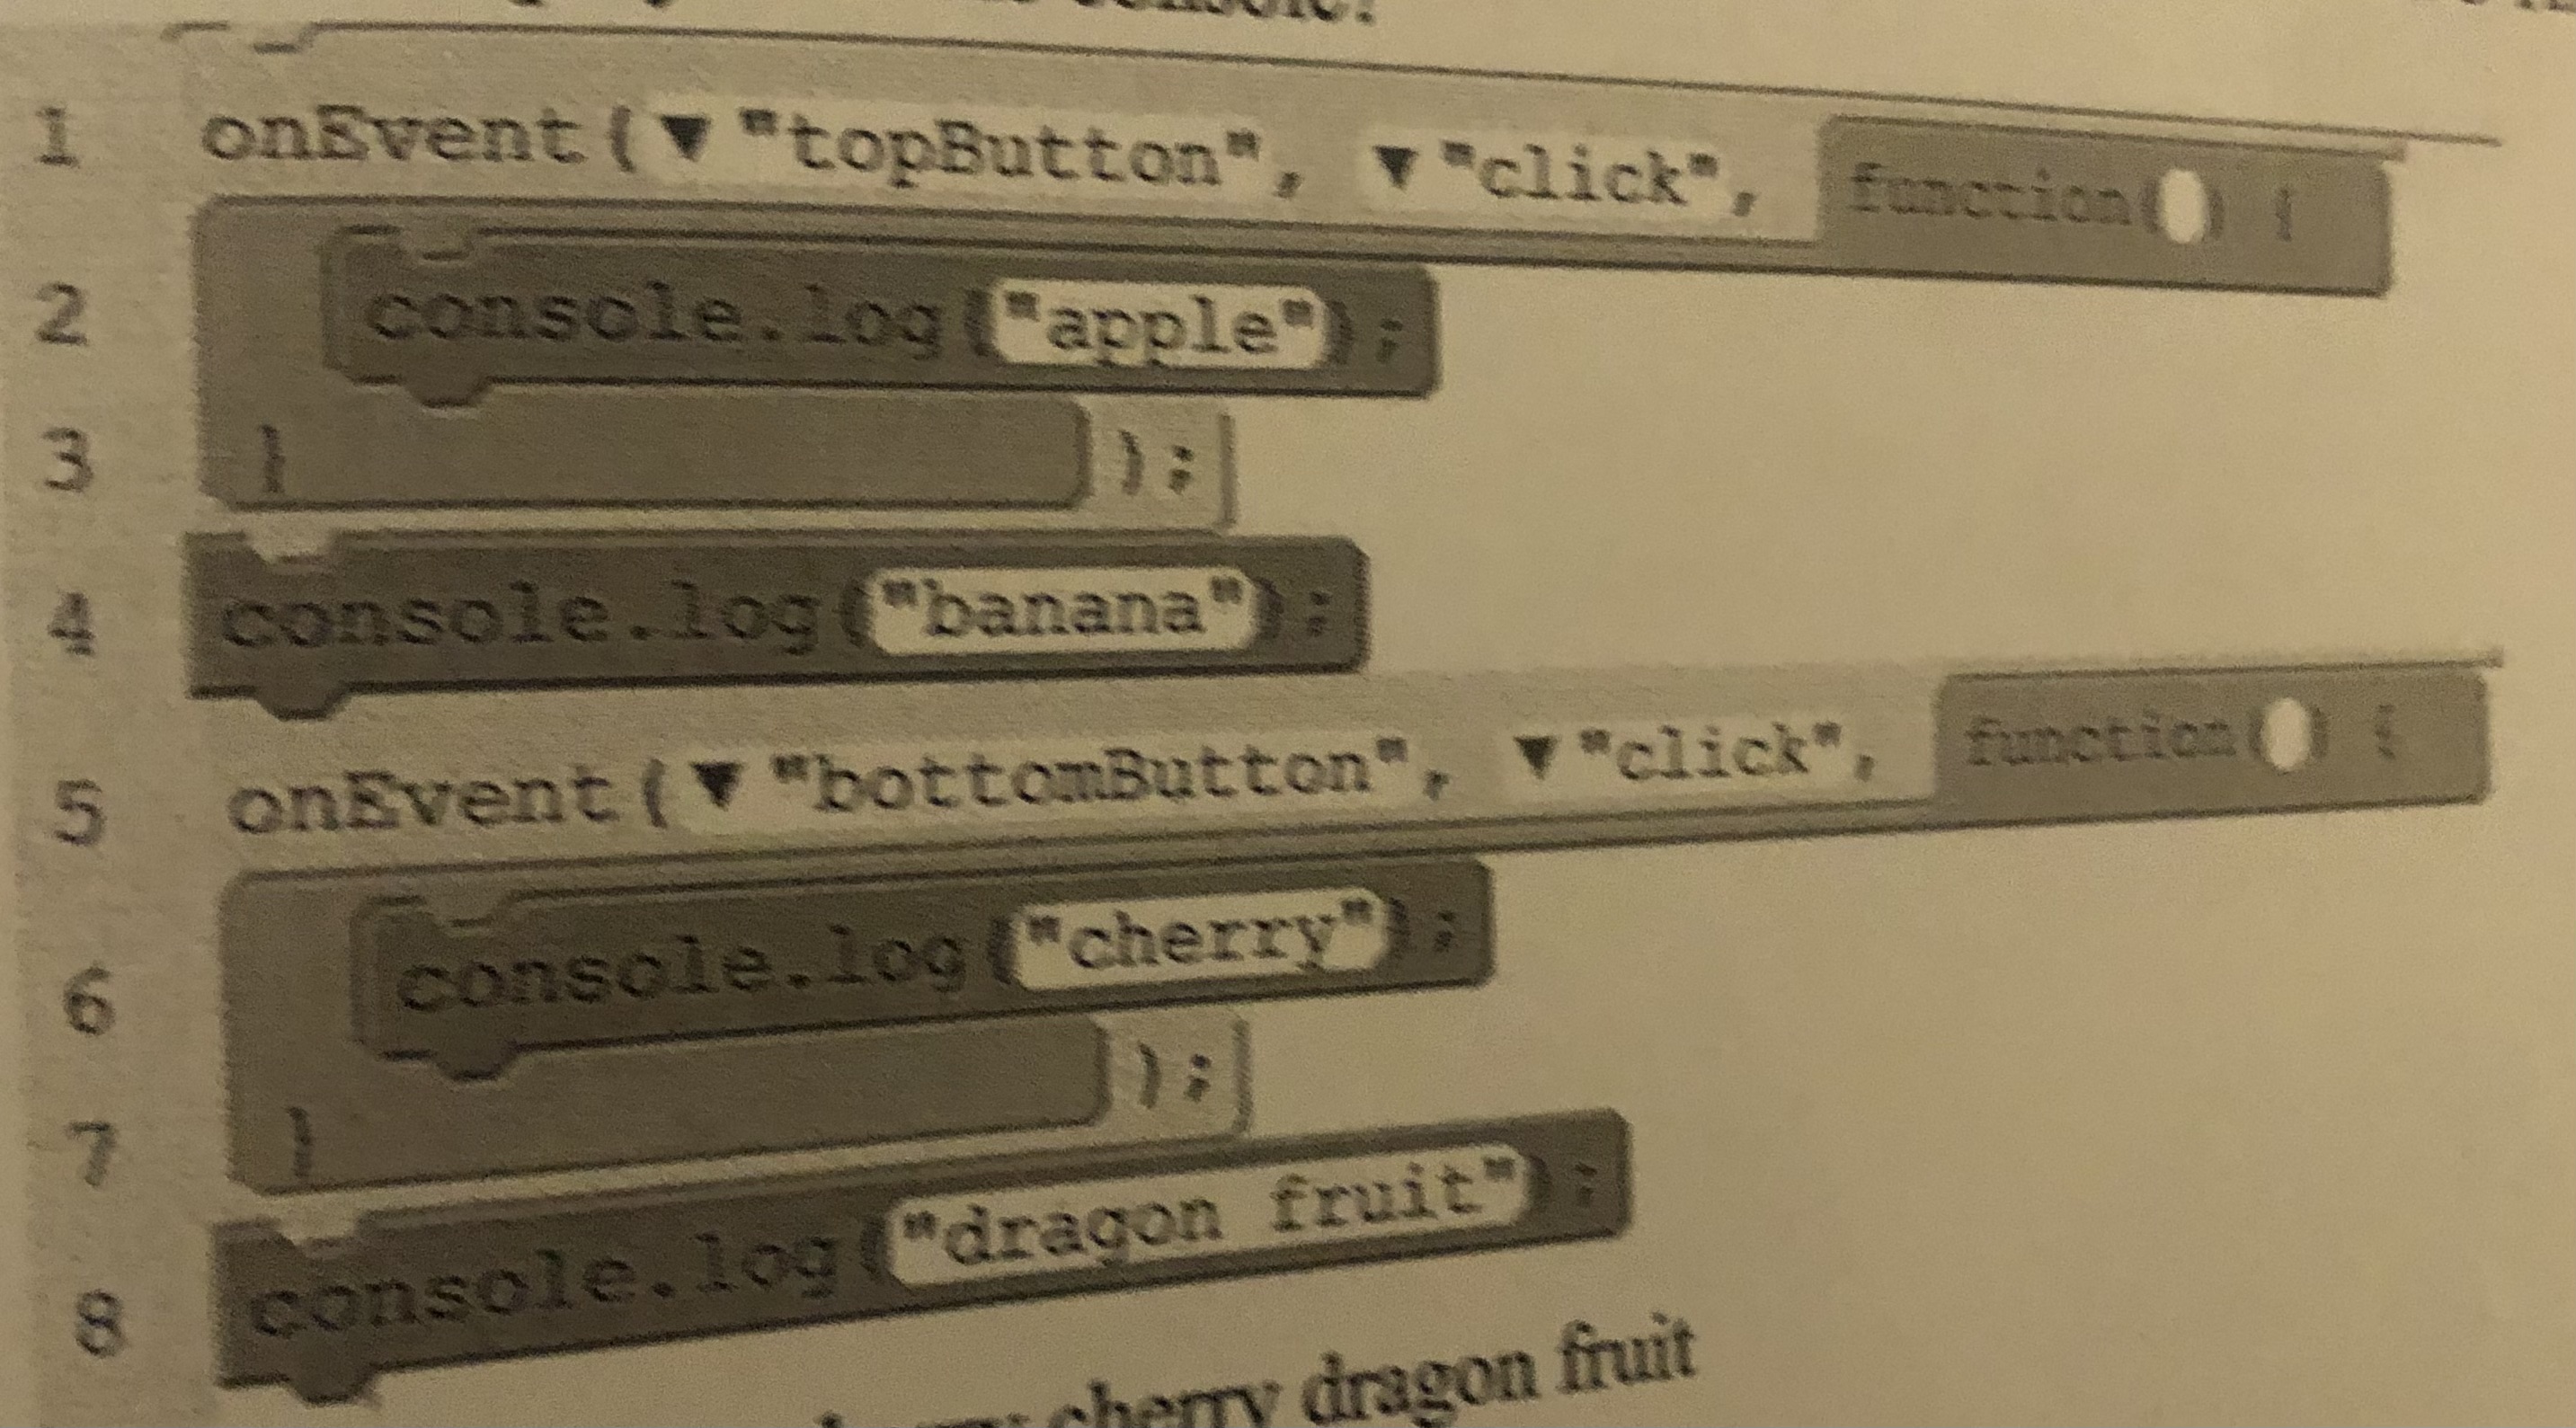 <p>The following program is run. Then the user clicks the “bottomButton” two times. What will be displayed in the console?</p><p>A.) apple banana cherry cherry dragon fruit</p><p>B.) banana dragon fruit cherry cherry</p><p>C.) banana dragon fruit apple apple</p><p>D.) banana cherry cherry dragon fruit</p>